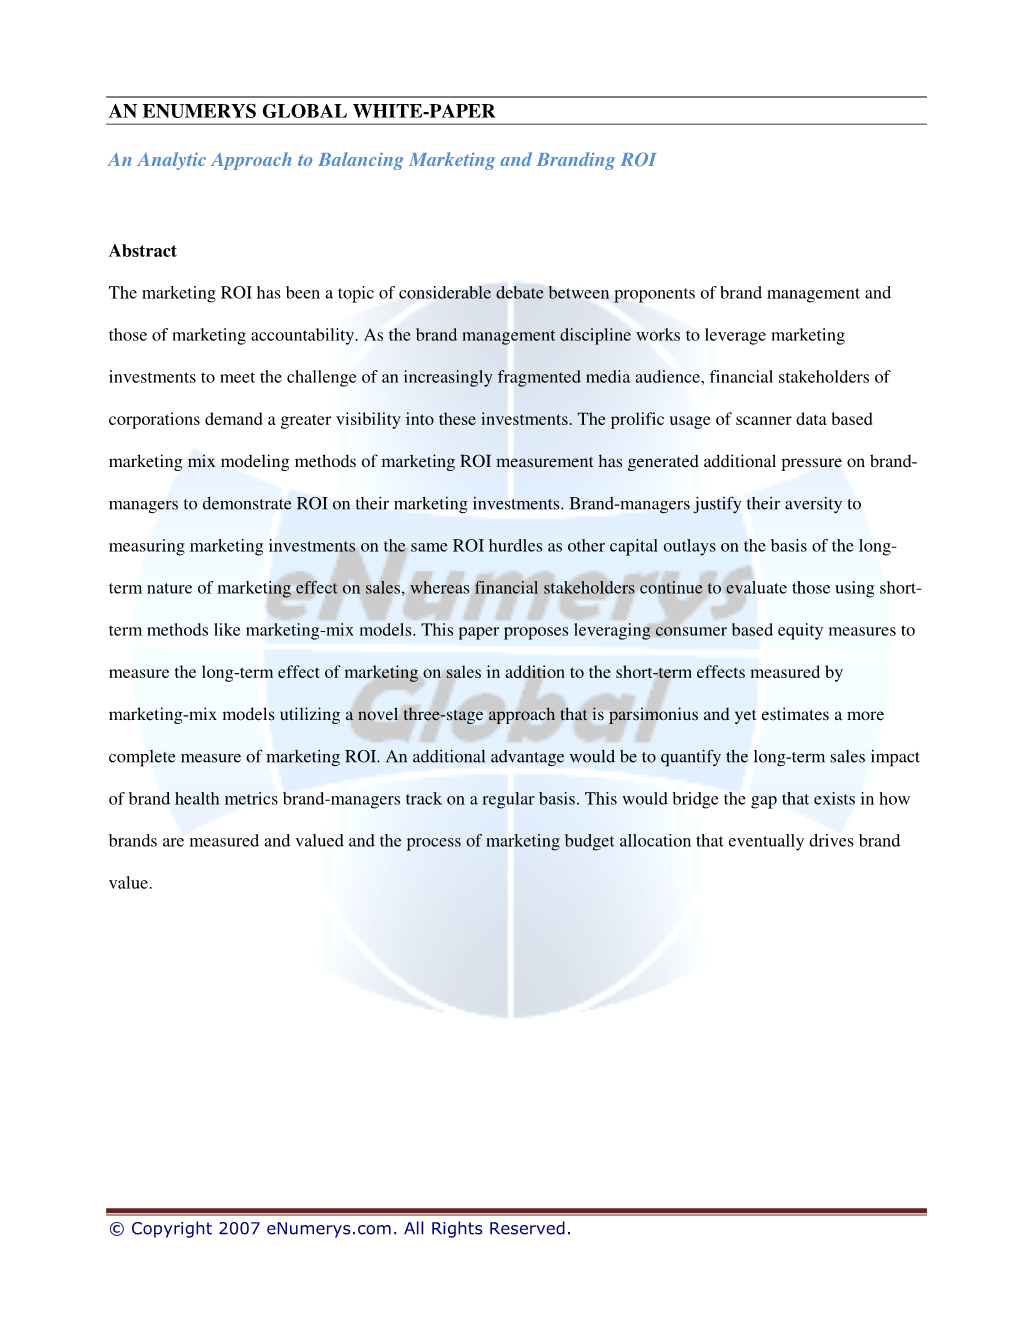 AN ENUMERYS GLOBAL WHITE-PAPER an Analytic Approach to Balancing Marketing and Branding